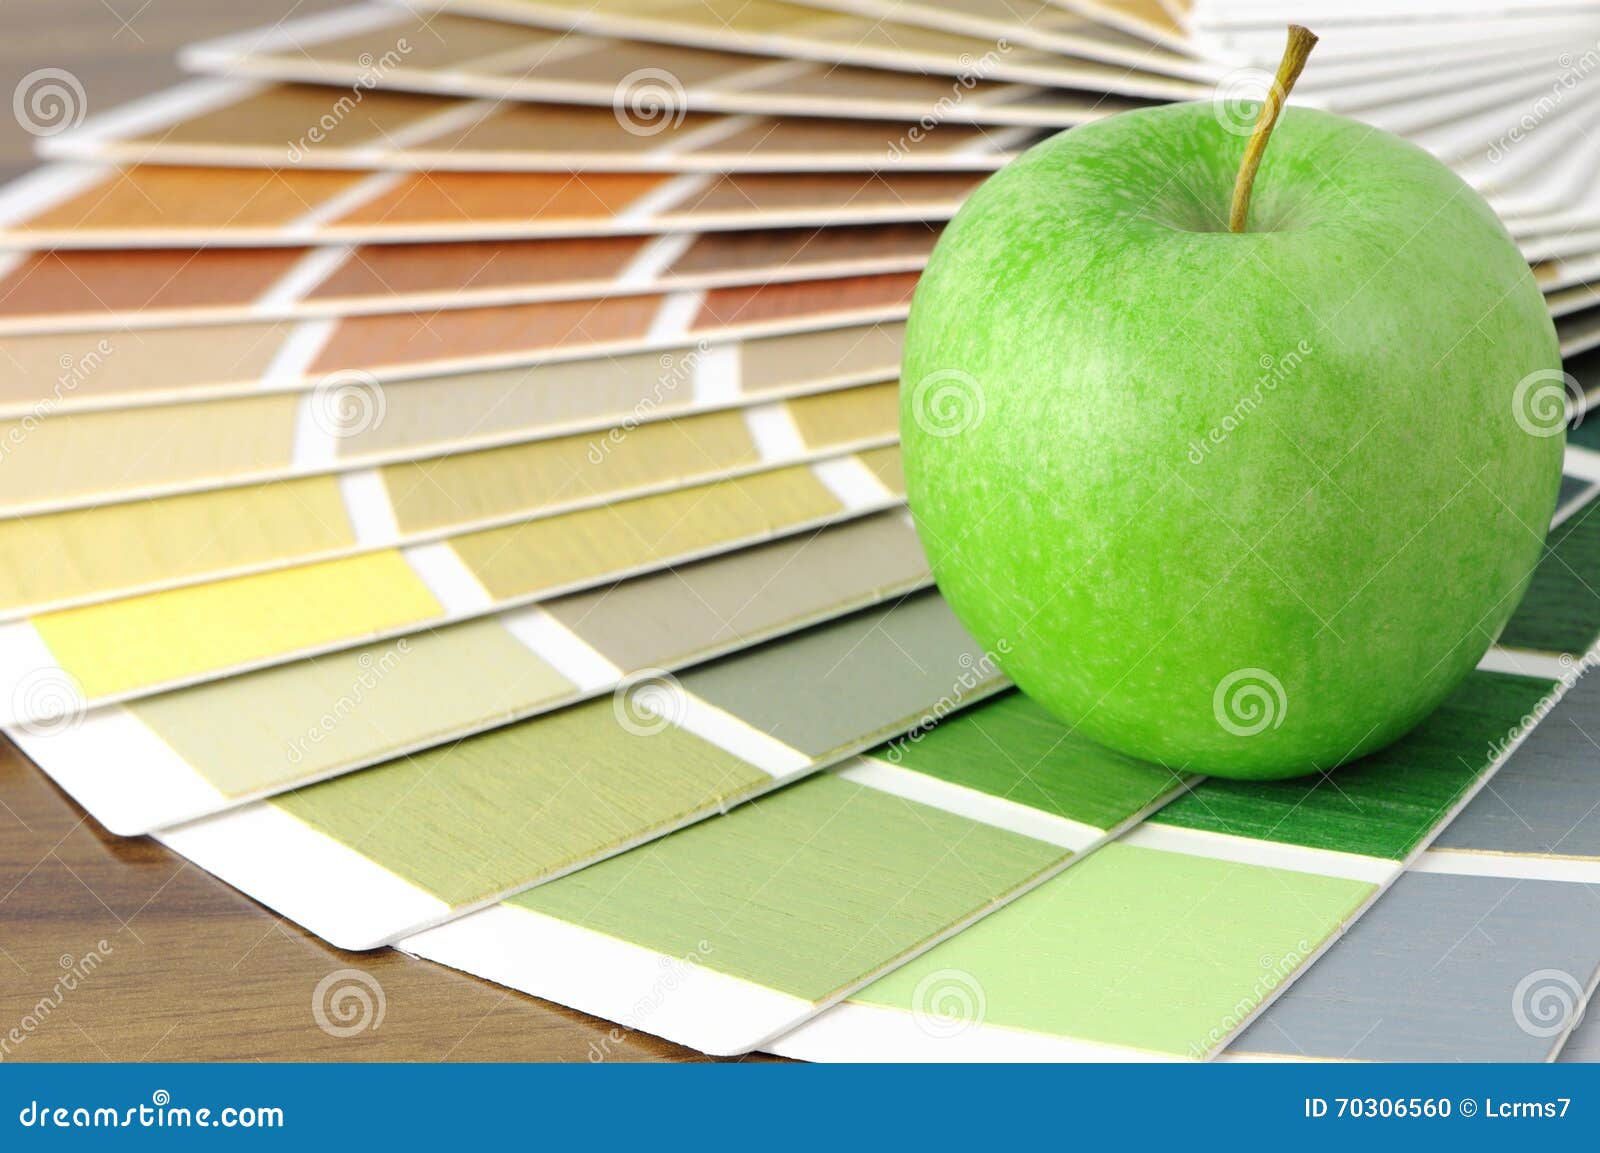 color swatch on a table with green apple